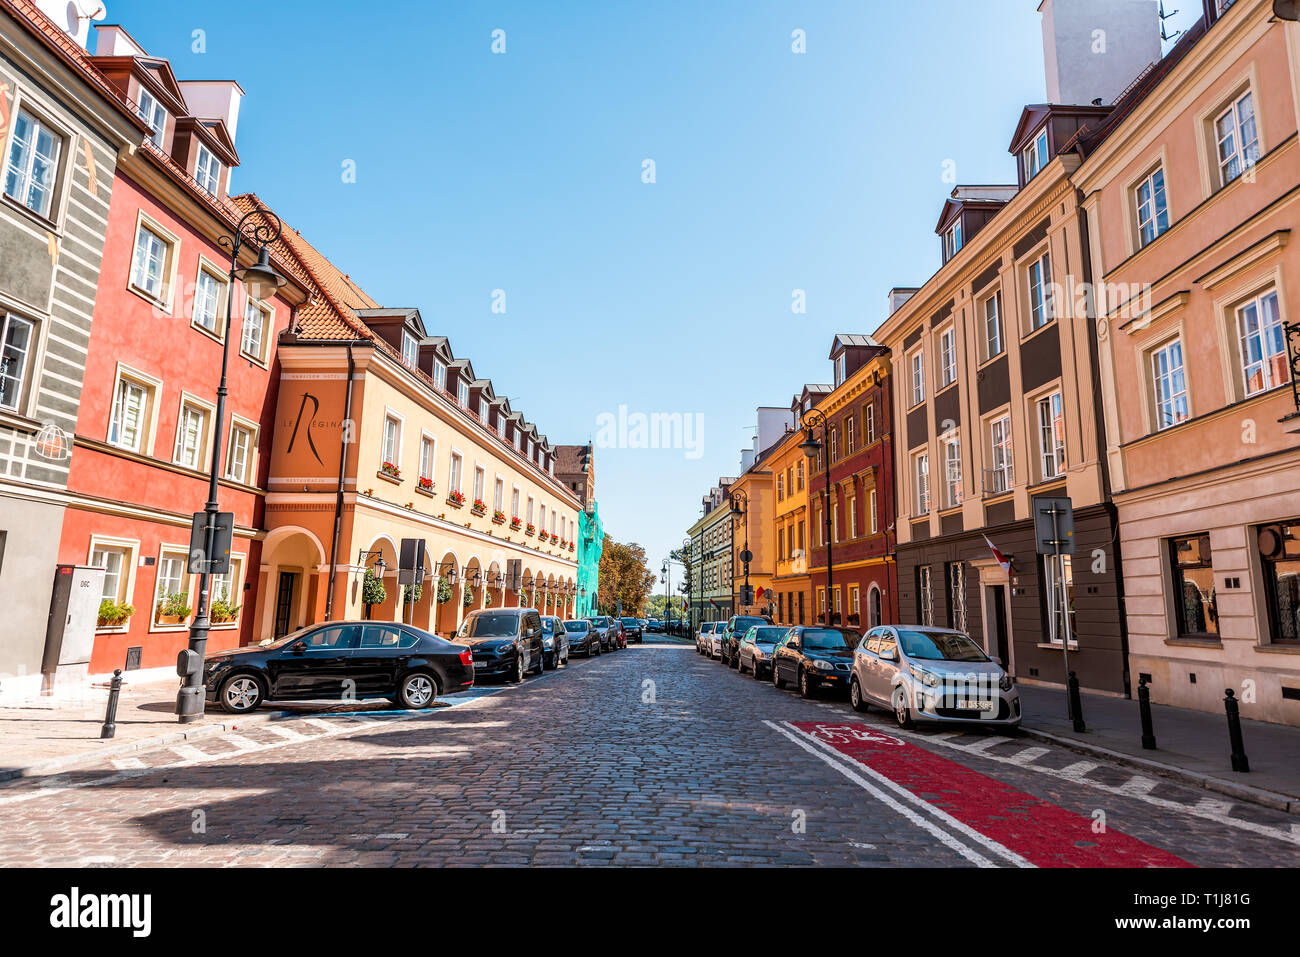 Warsaw, Poland - August 22, 2018: Famous old town in capital city during sunny summer day with nobody on cobblestone street alley and Le Regina hotel  Stock Photo